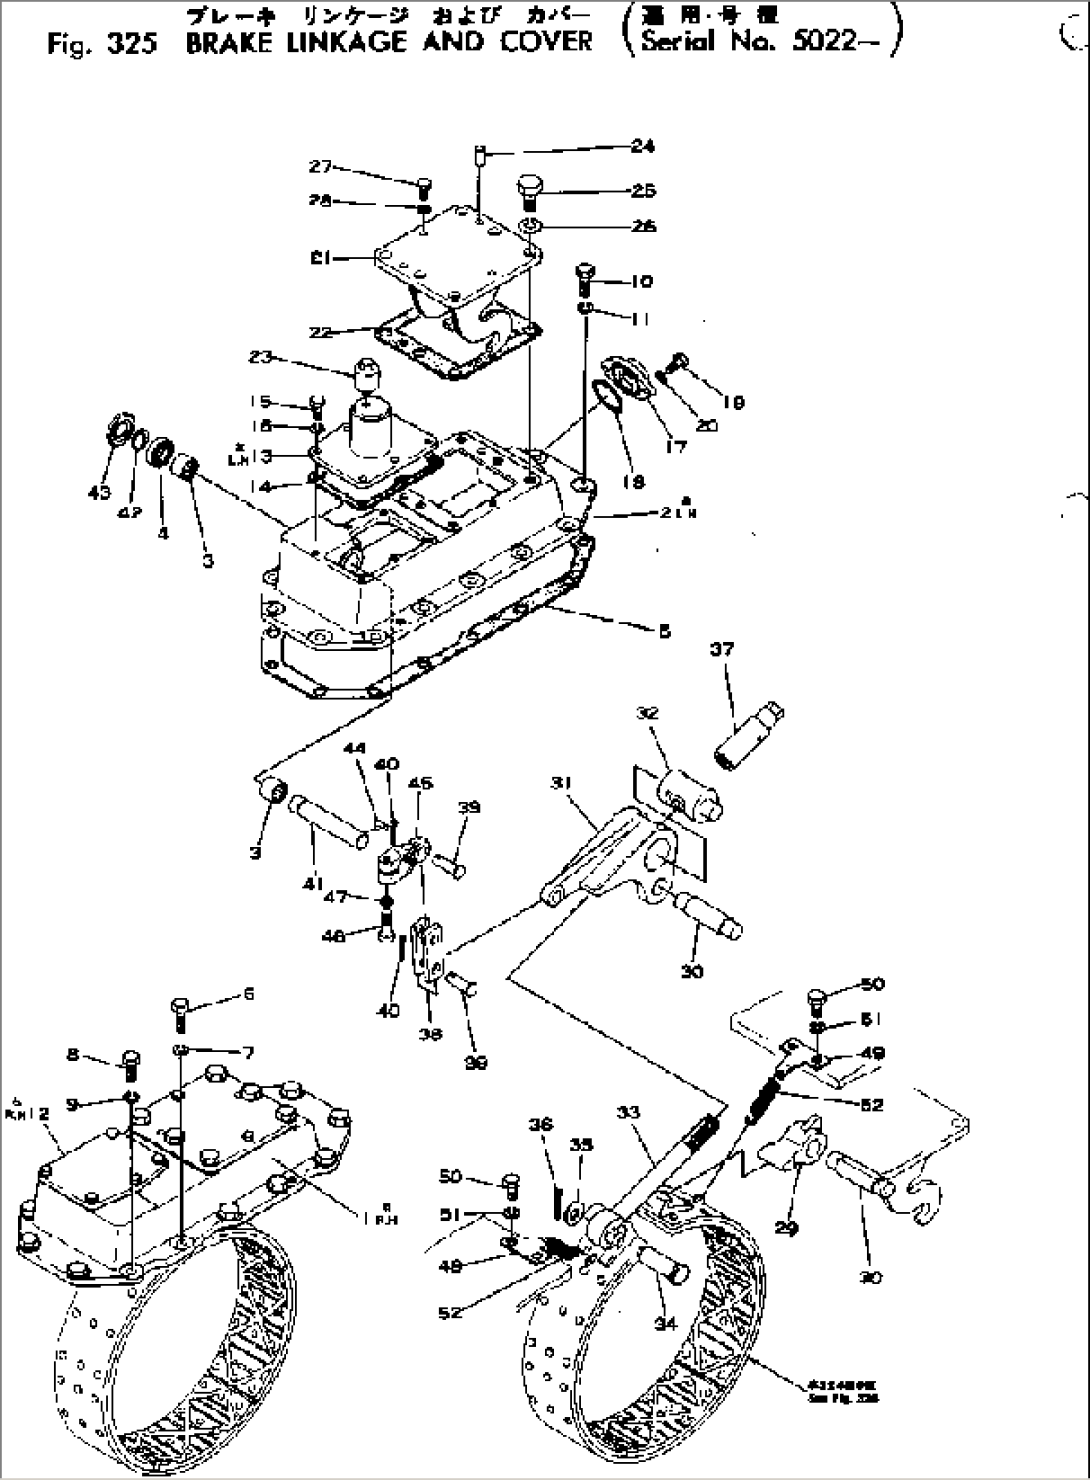 BRAKE LINKAGE AND COVER(#5022-)